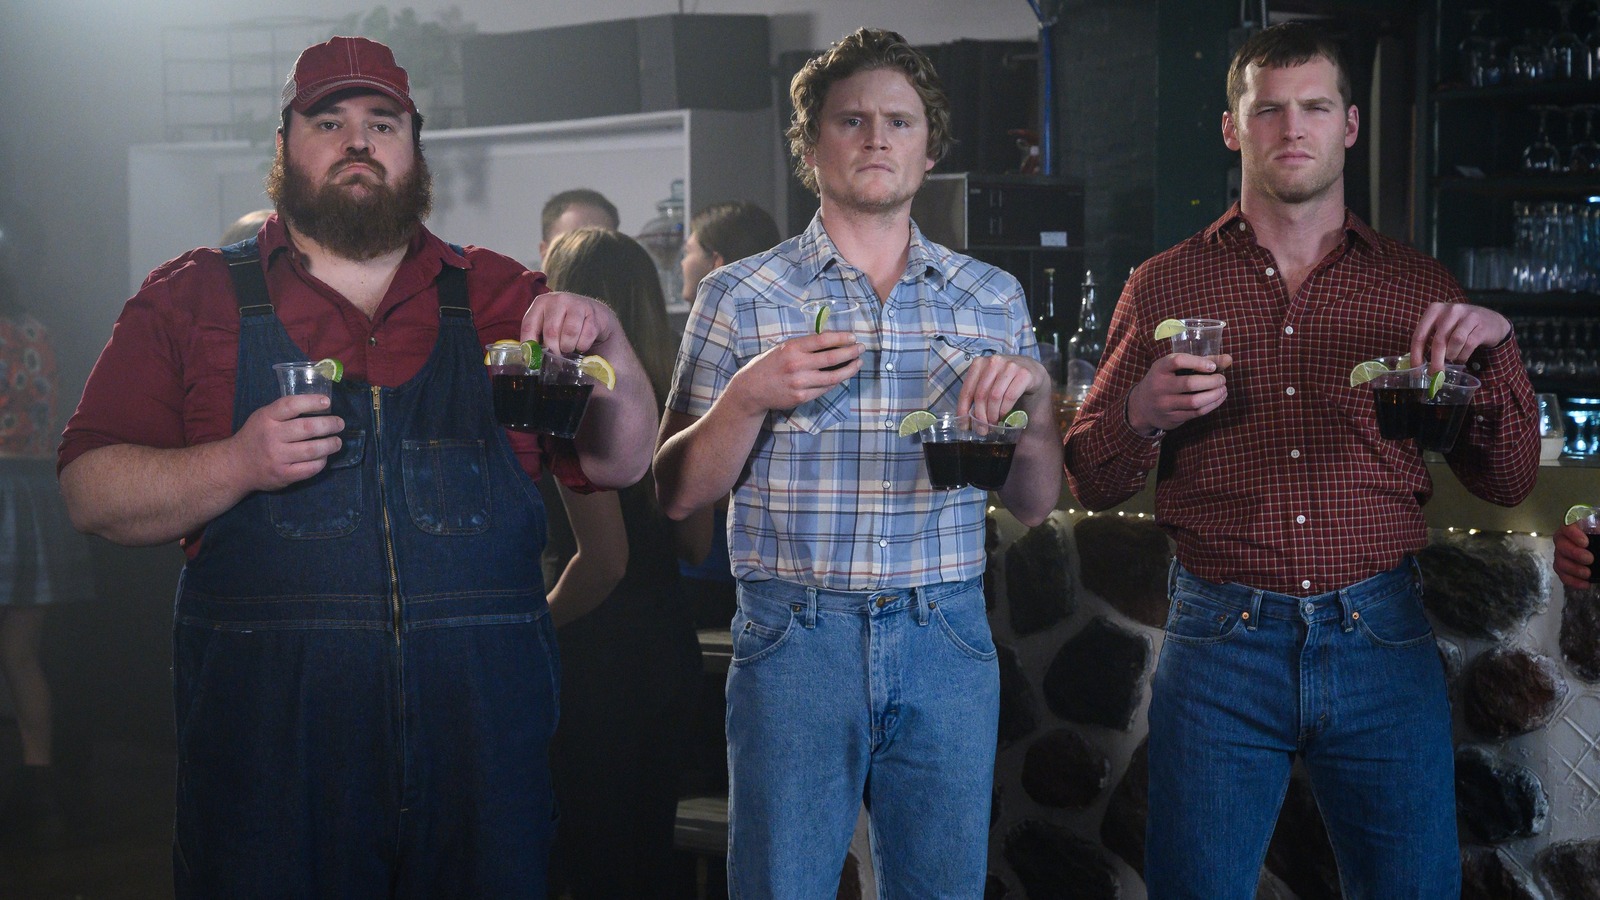 Letterkenny Season 10: Release Date, Cast, And More